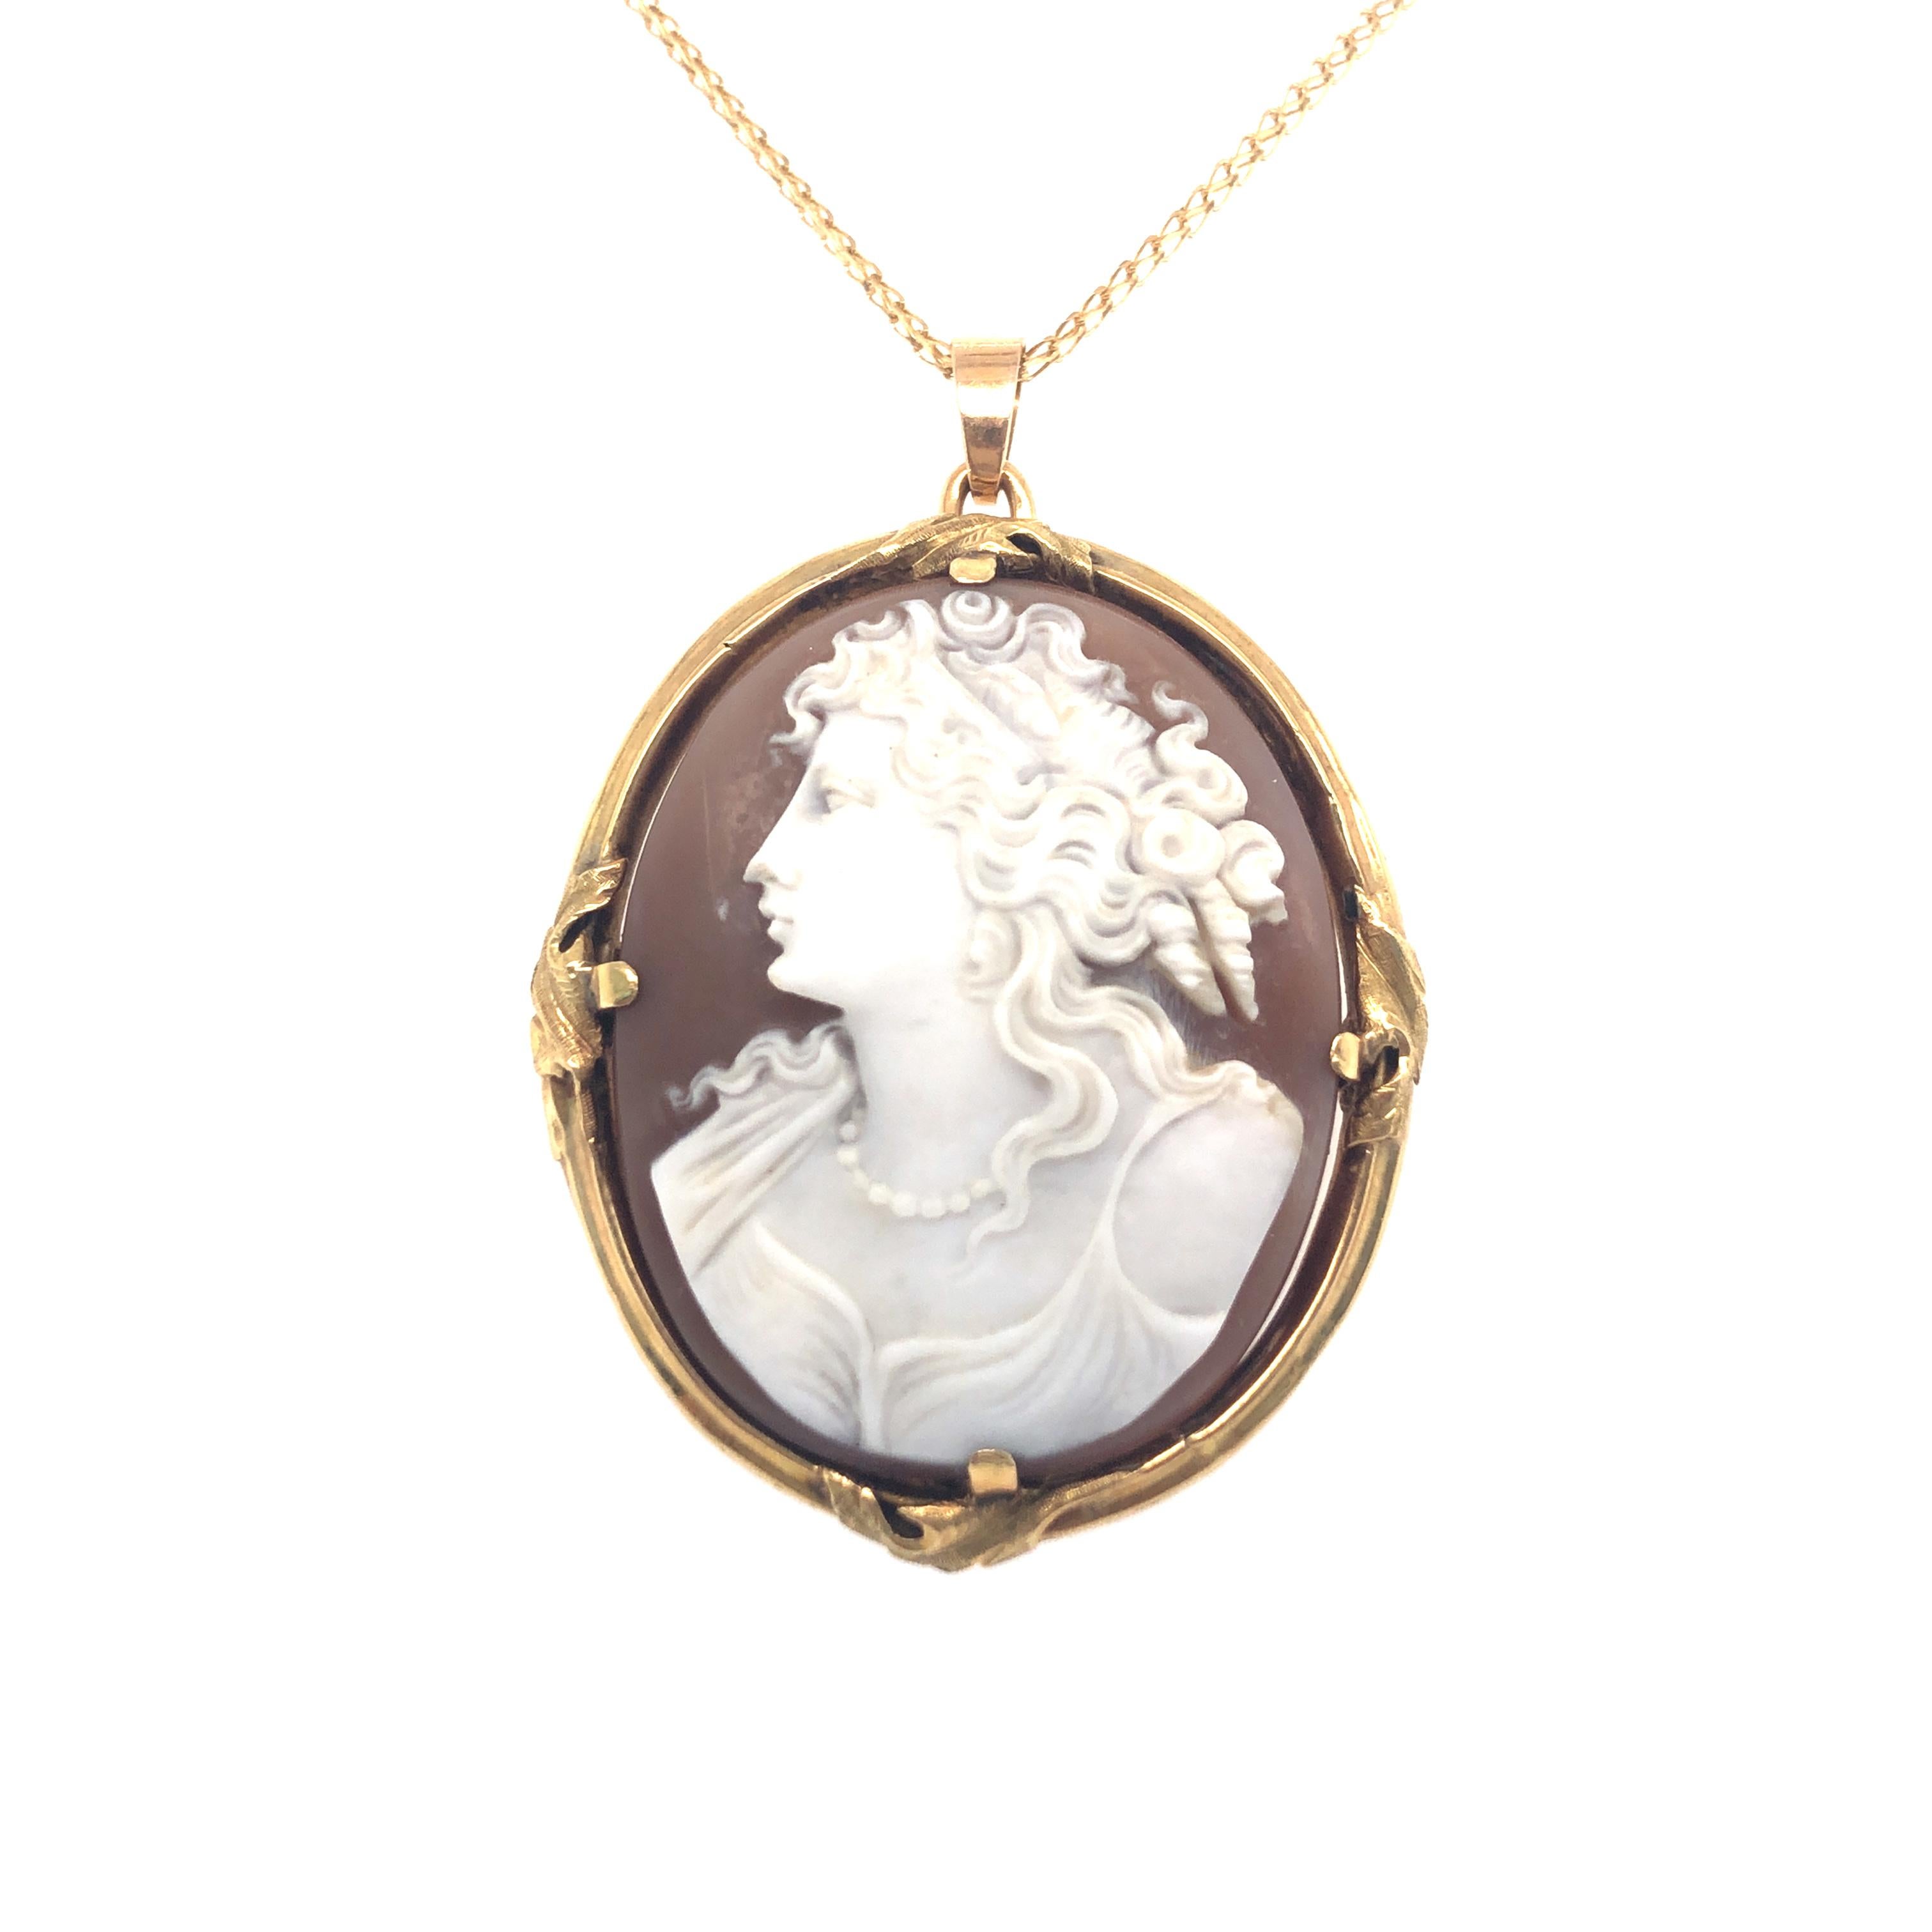 This hand-engraved shell cameo depicts a figure with a classic profile, upswept curly hairdo and flowing robe. The neck is adorned with a classic pearl necklace.
The two-coloured cameo is held by four prongs in a delicate setting decorated with